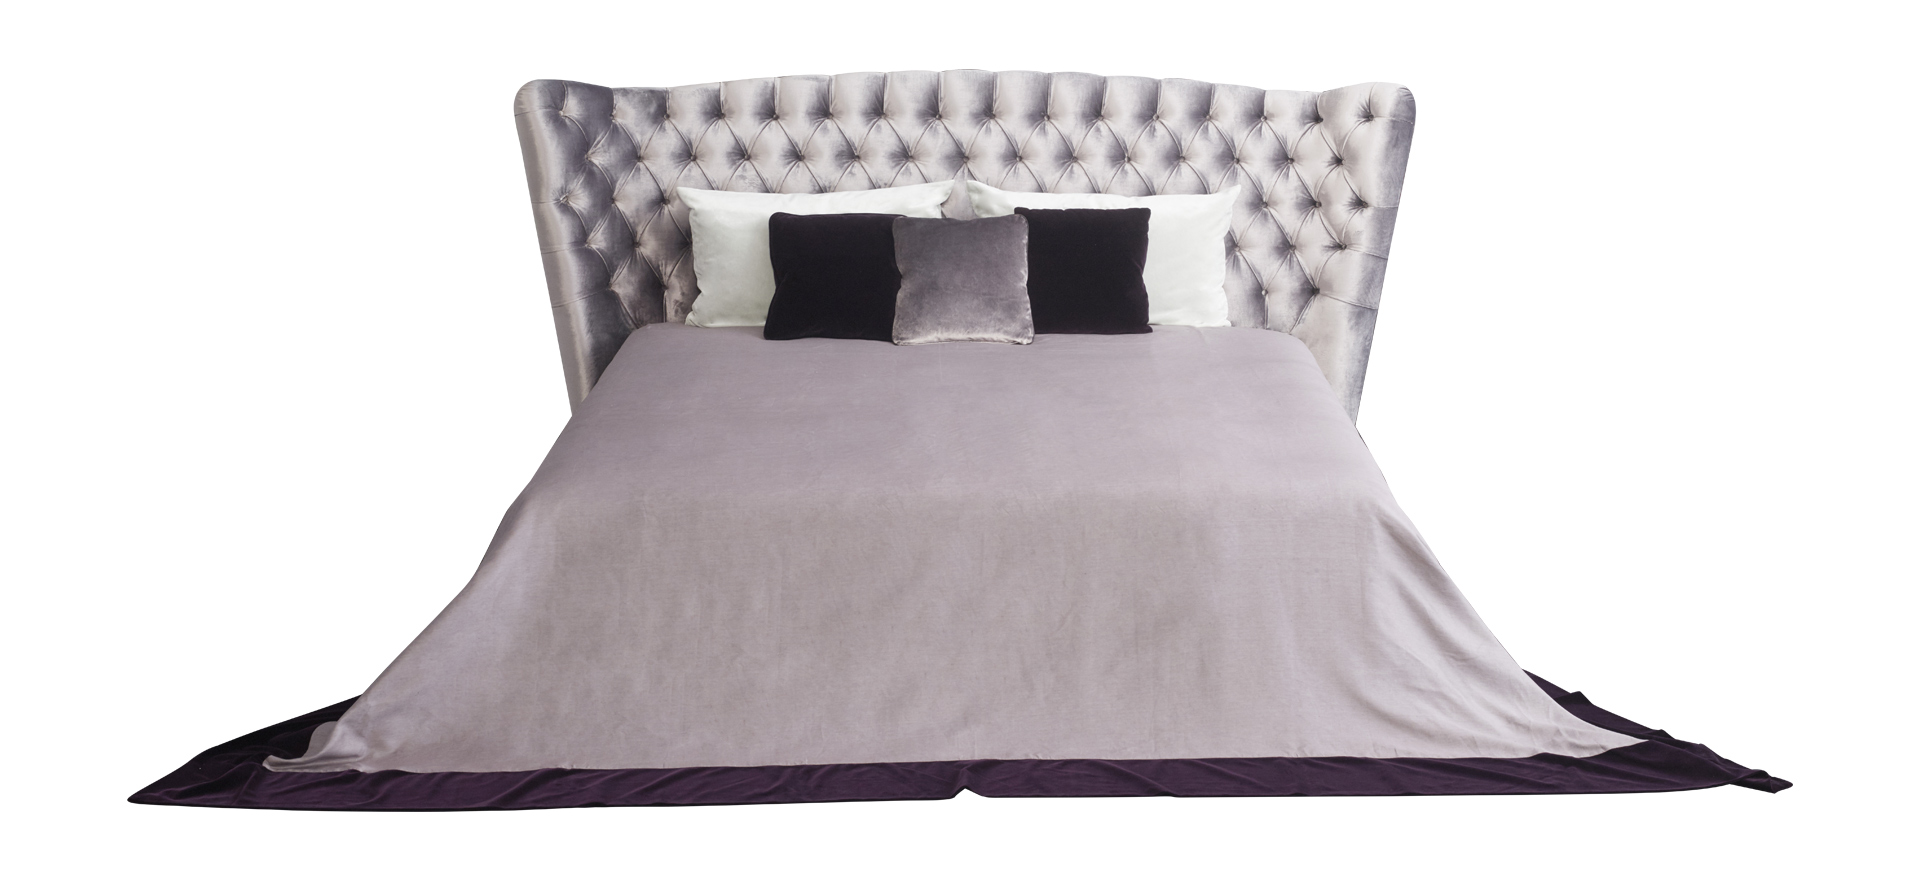 Frou Frou is a bed headboard with a bon ton style from the Promemoria's catalogue | Promemoria